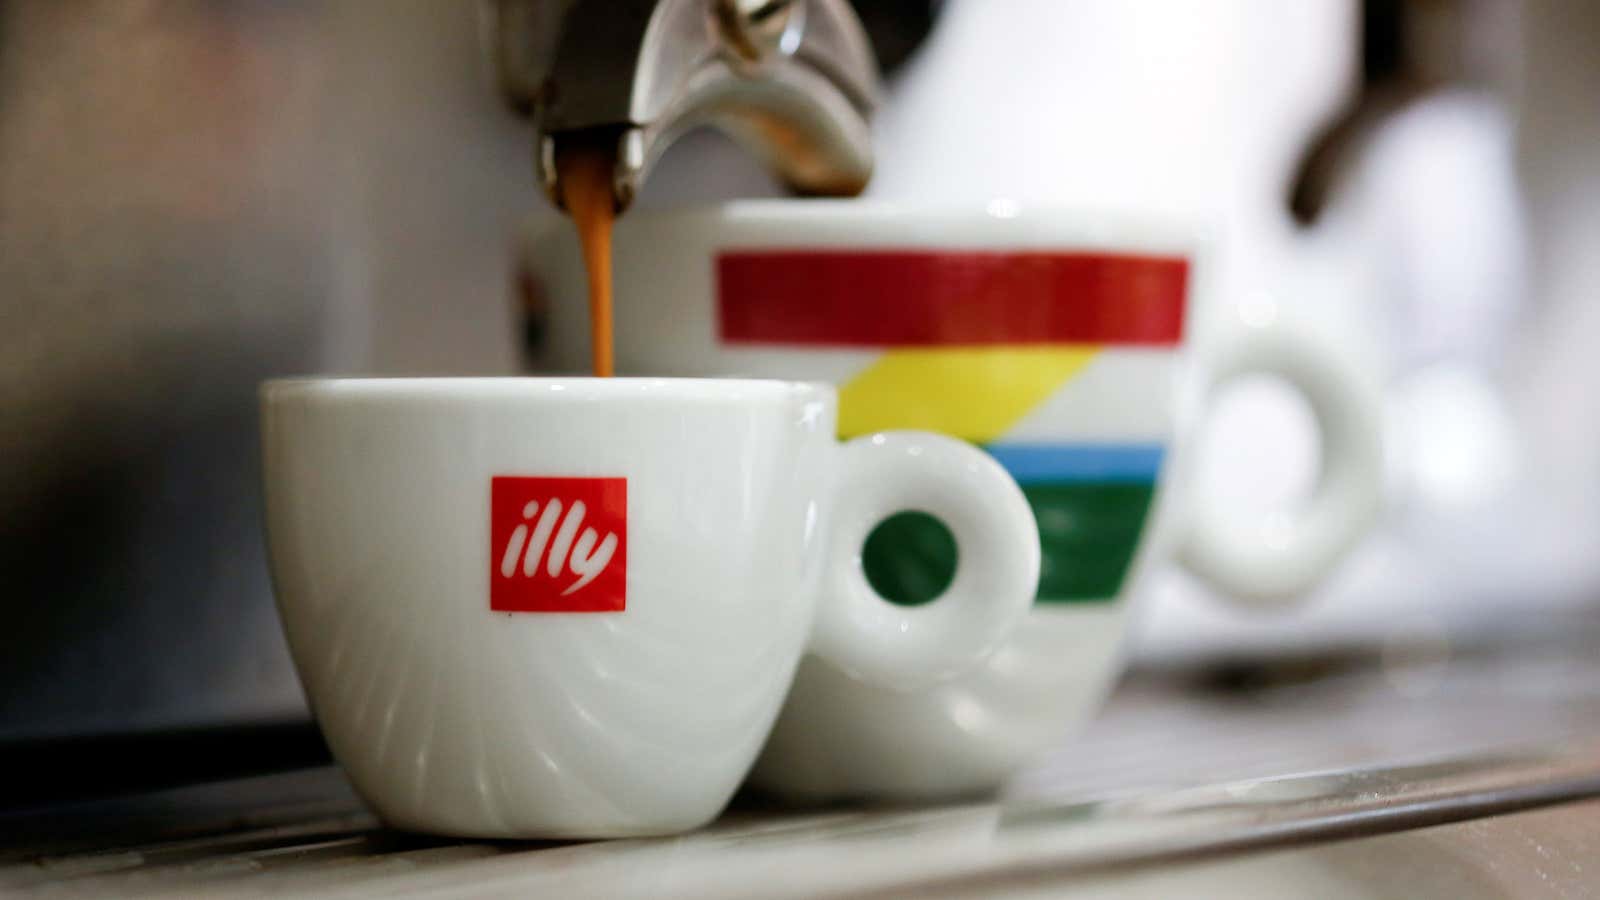 Italian coffee company illycaffé on sustainability in its supply chain